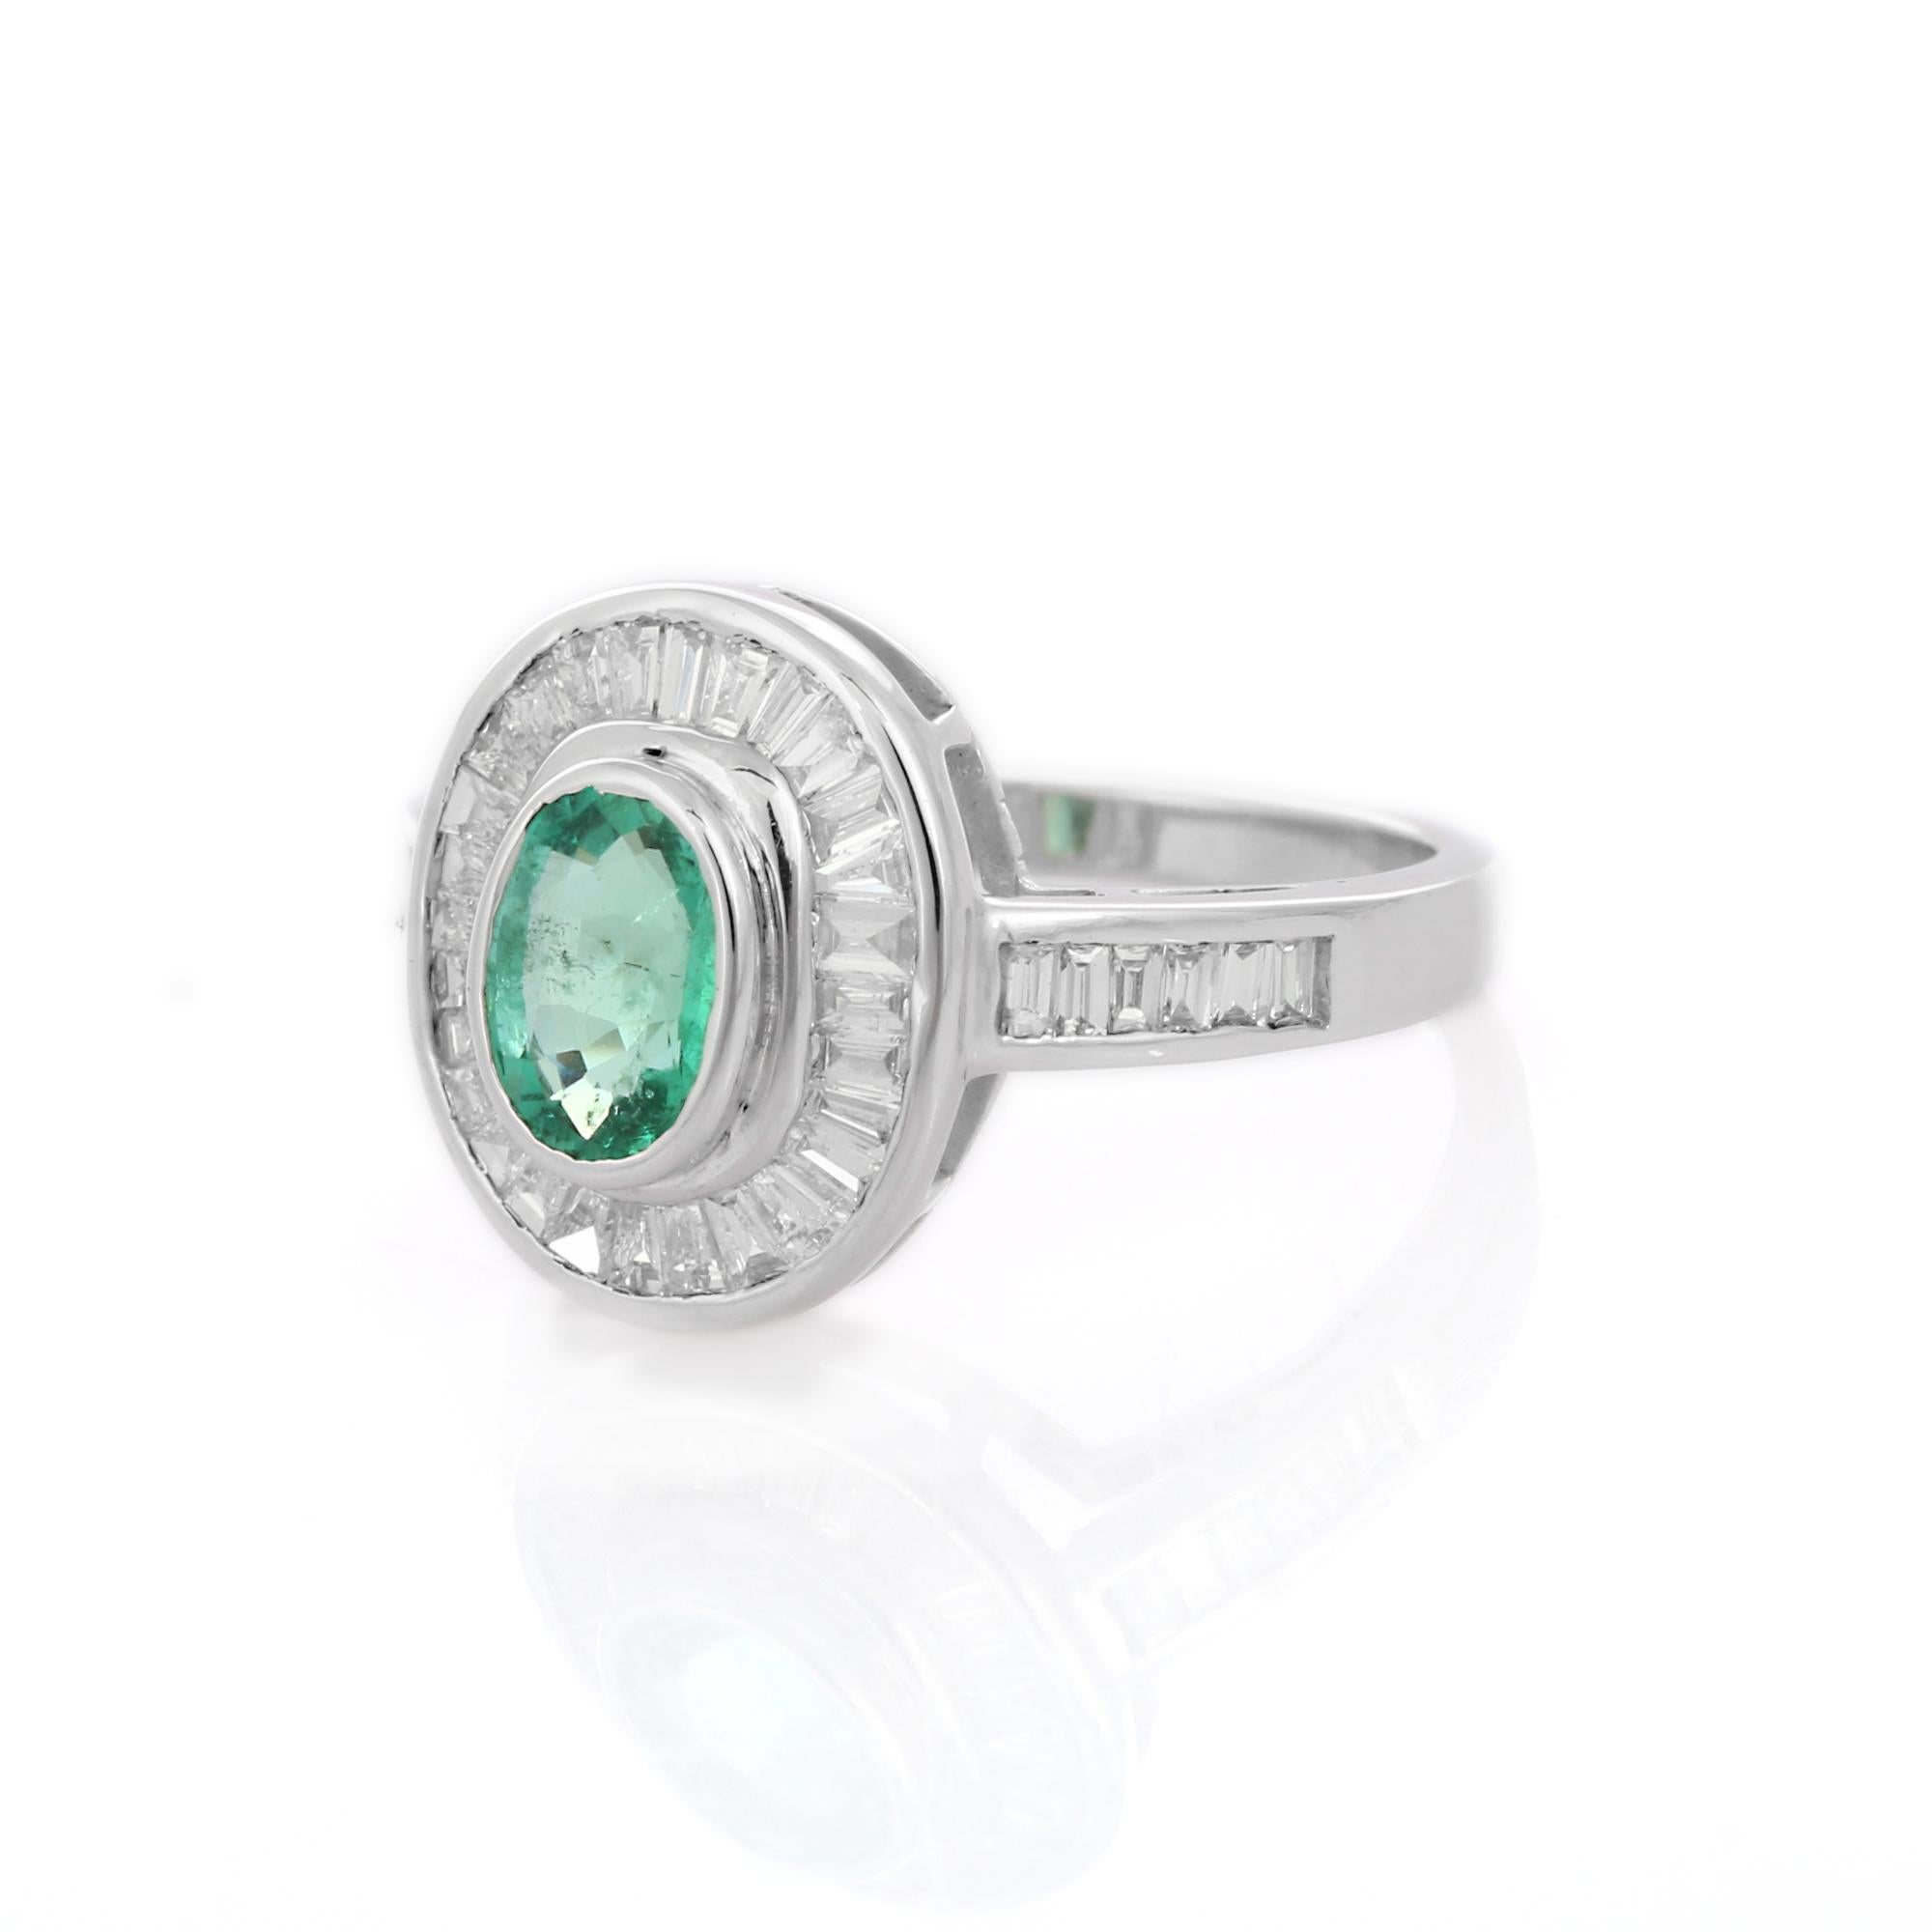 For Sale:  1.56 Carat Emerald Cocktail Ring with Halo of Diamonds in 18K White Gold  4